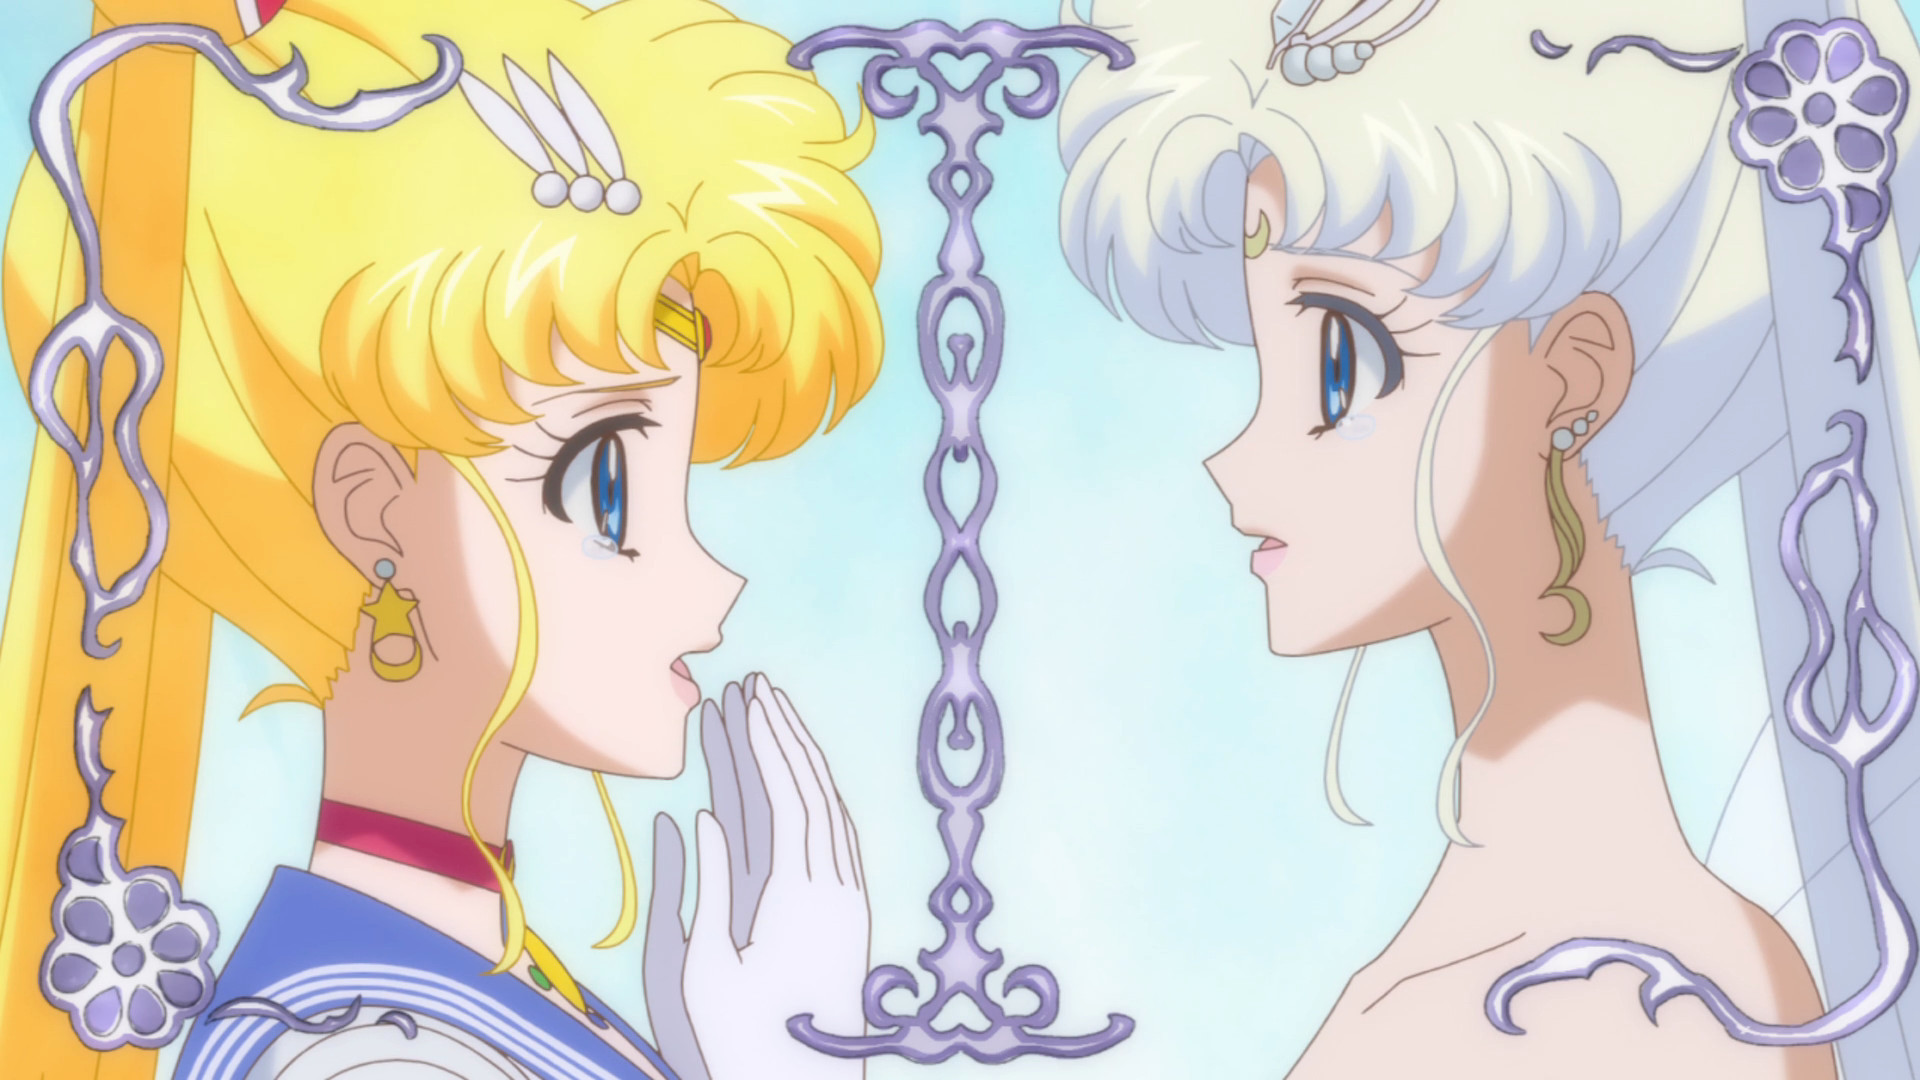 1920x1080 A review of the final episode of Sailor Moon Crystal, Act 26 .